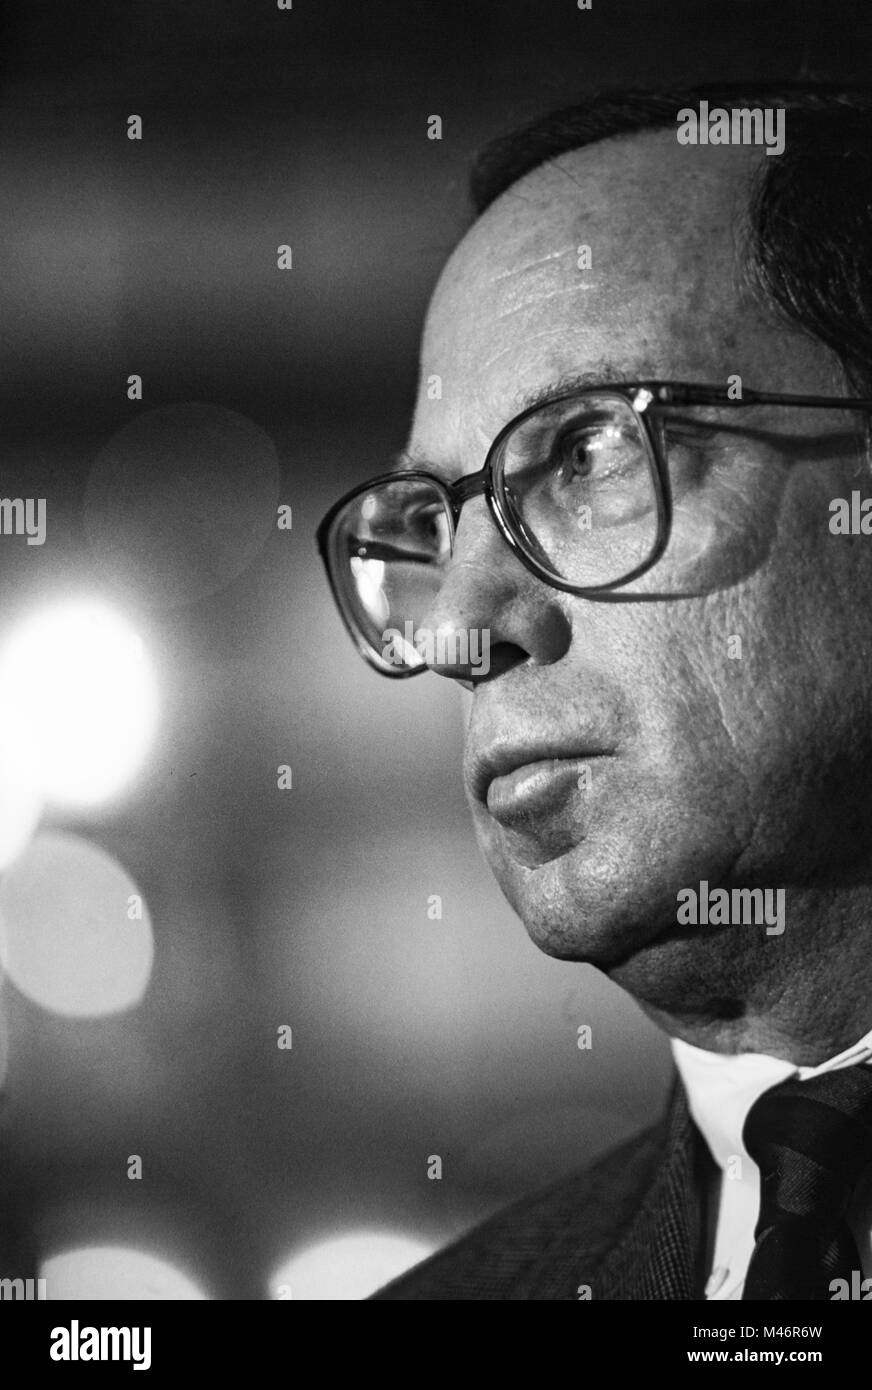 U.S. Senator Sam Nunn, a Democrat from Georgia served as Chairman of the Senate Armed Services Committee until his retirement from politics in 1996. Stock Photo